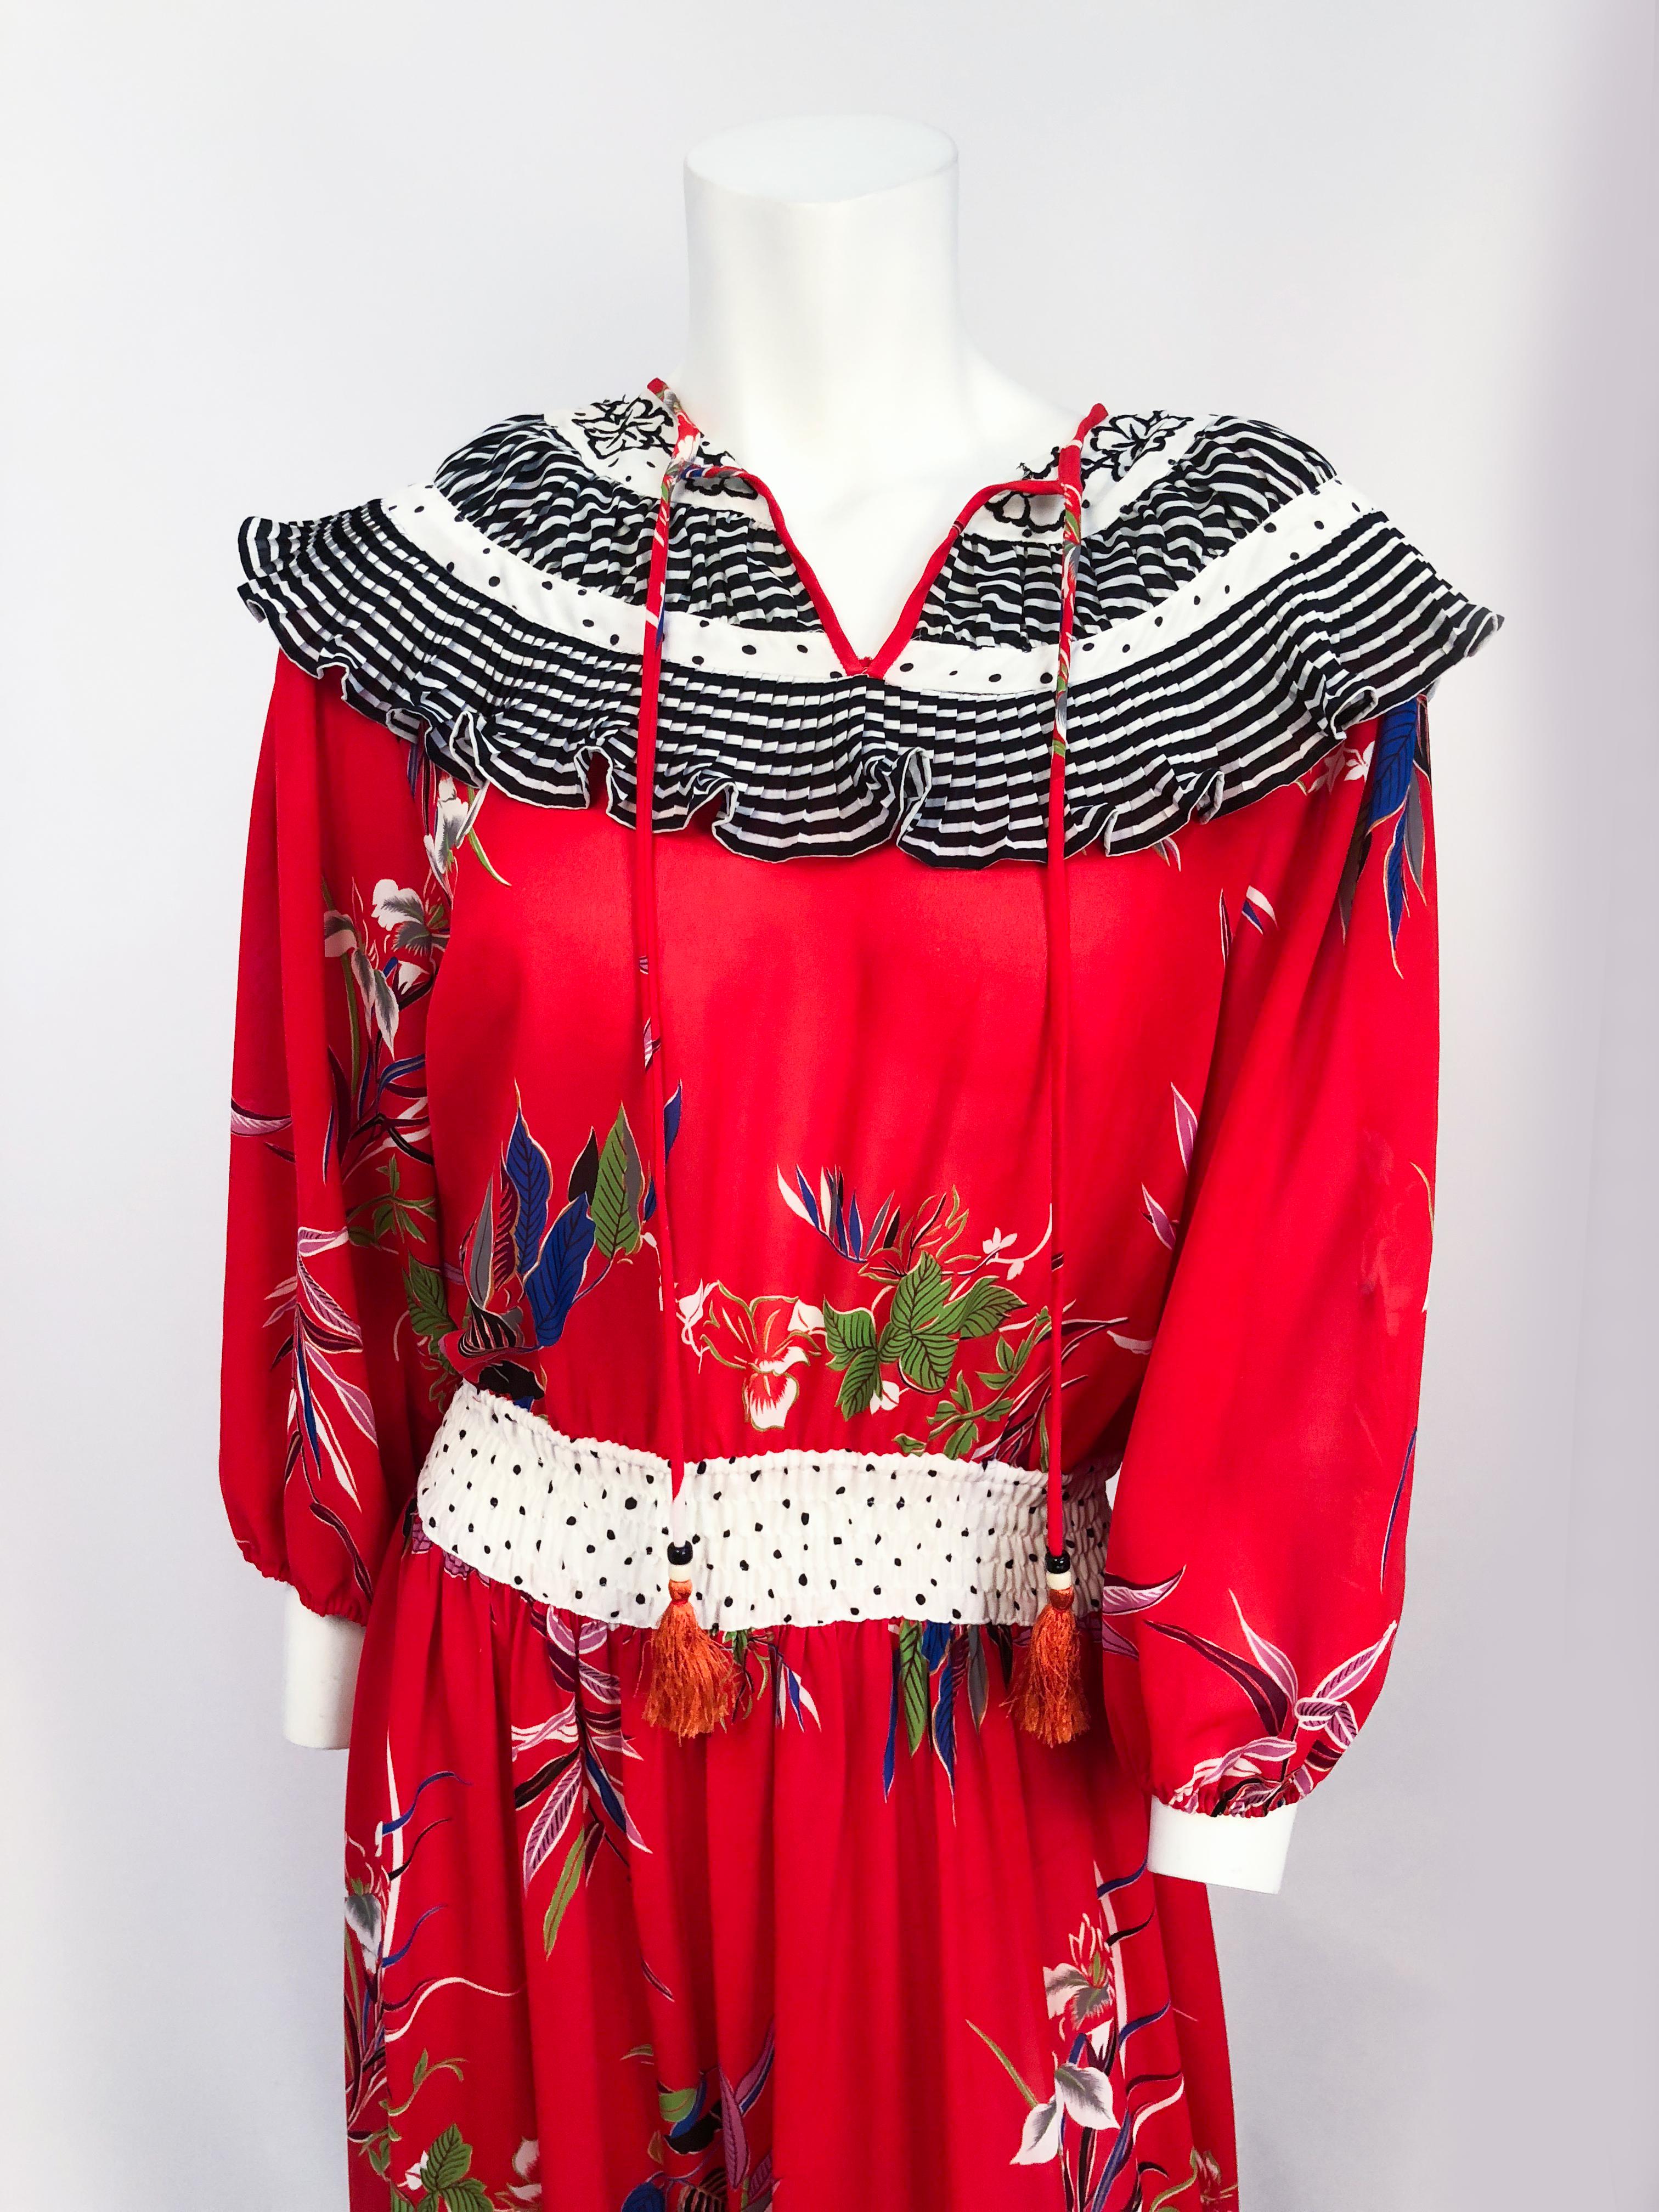 1980s Dian Fréis Red Floral Printed Dress. Red Floral printed dress with enlarged yoked collar that is pleated and fluted. Tassel neck tying closure and puff sleeves